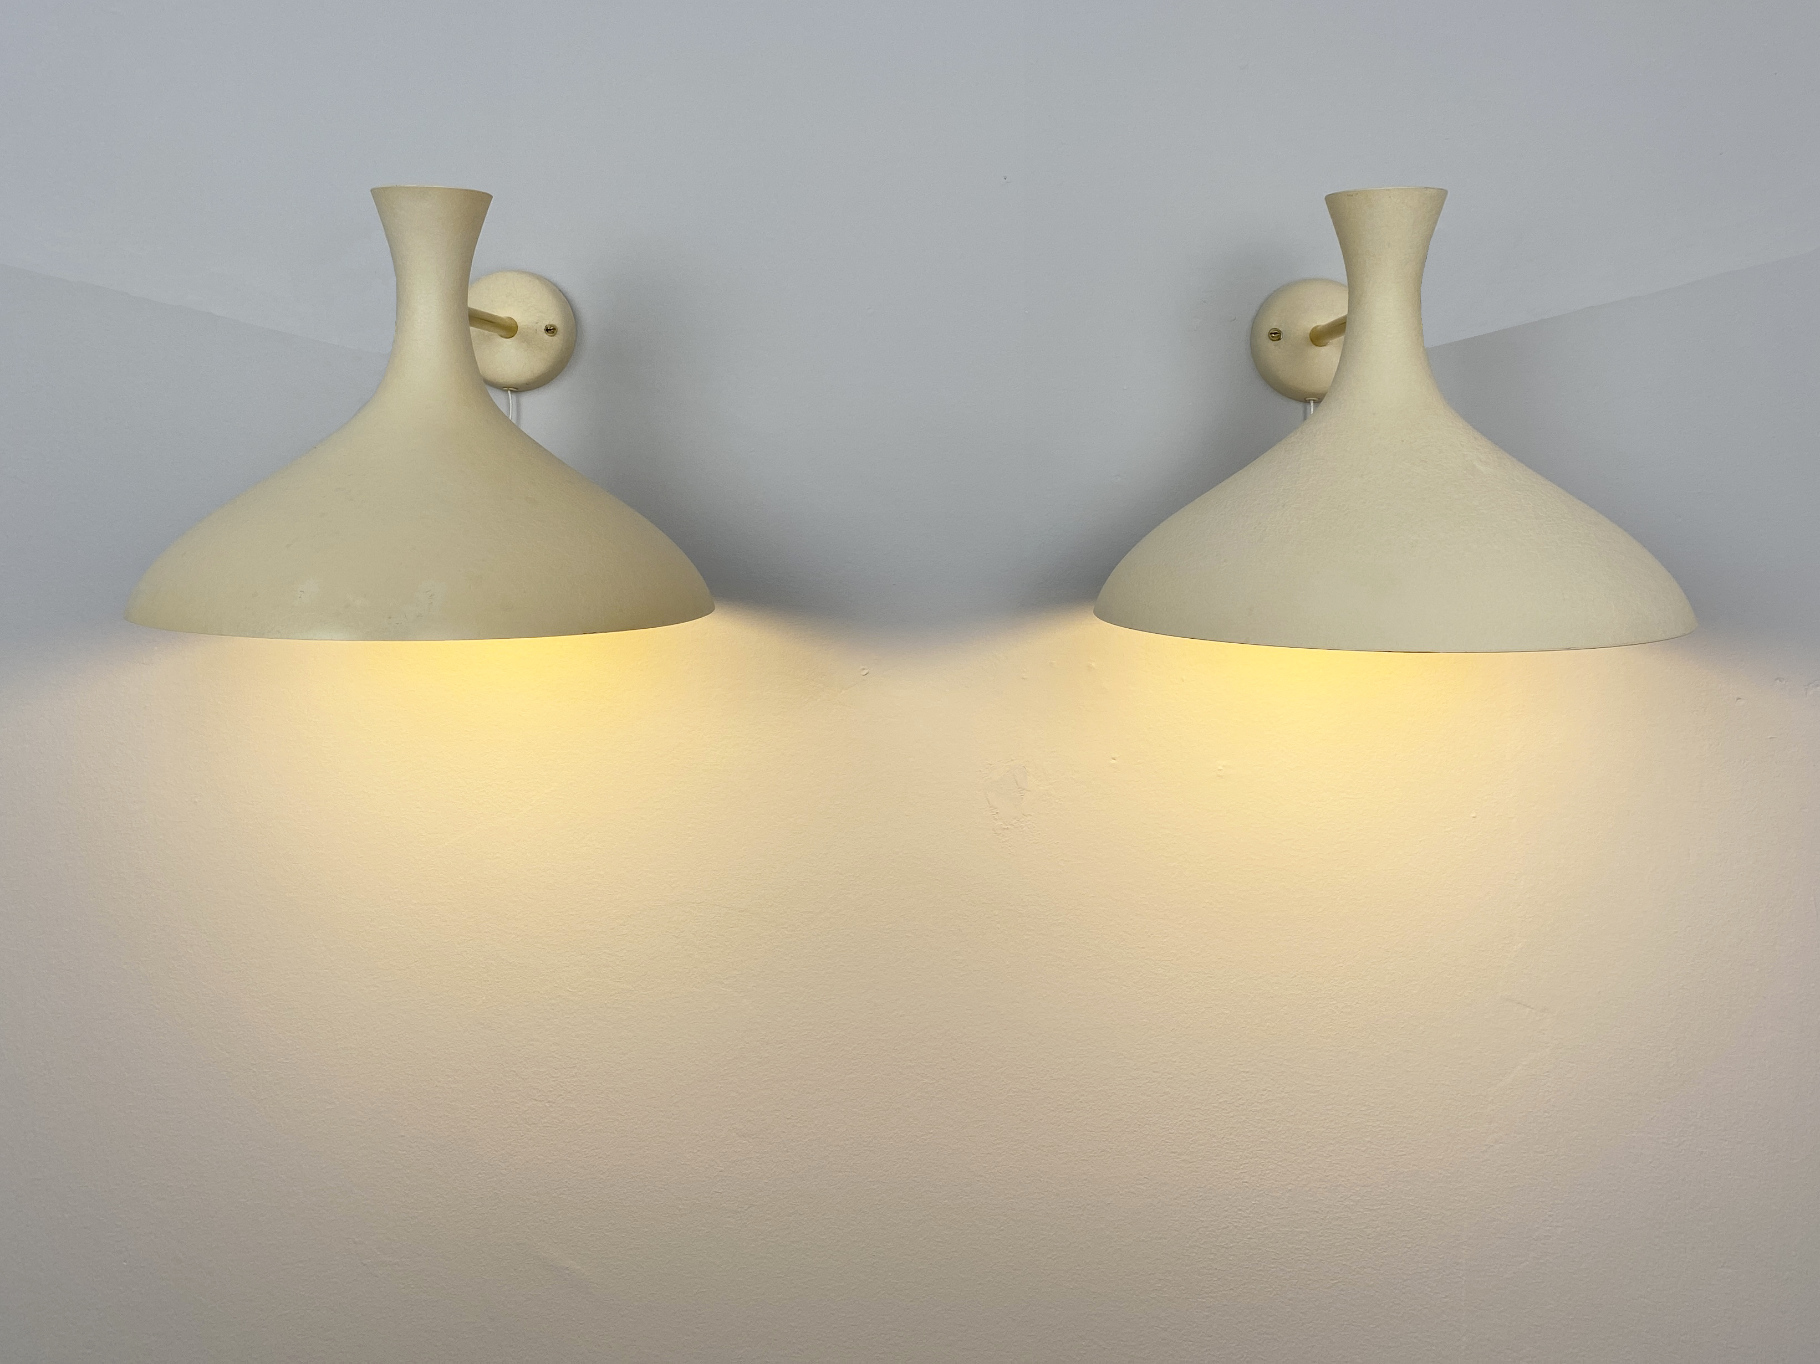 Pair of Cream White Sconces / Wall Lamps by Cosack, Germany, 1950s